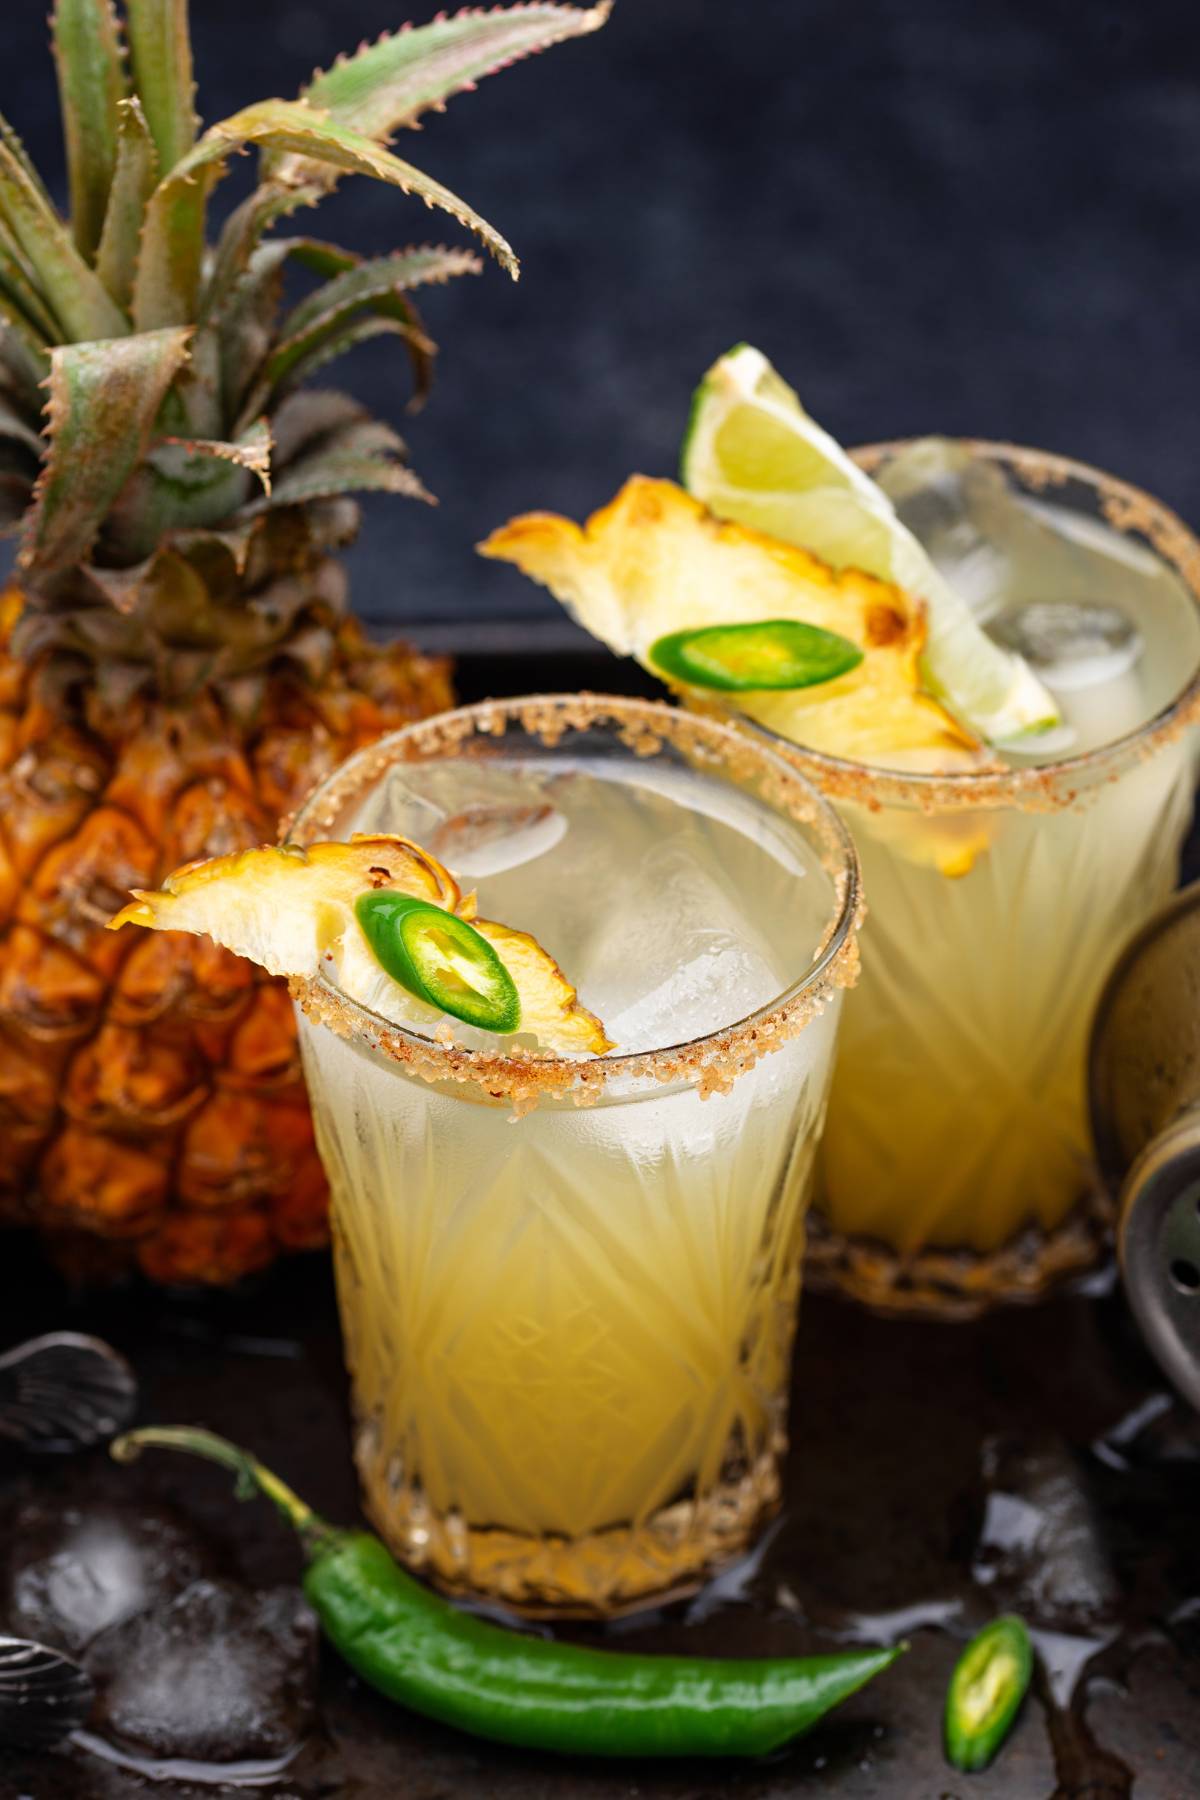 Easy Summer Drinks Your Guests Will Love: Top 15